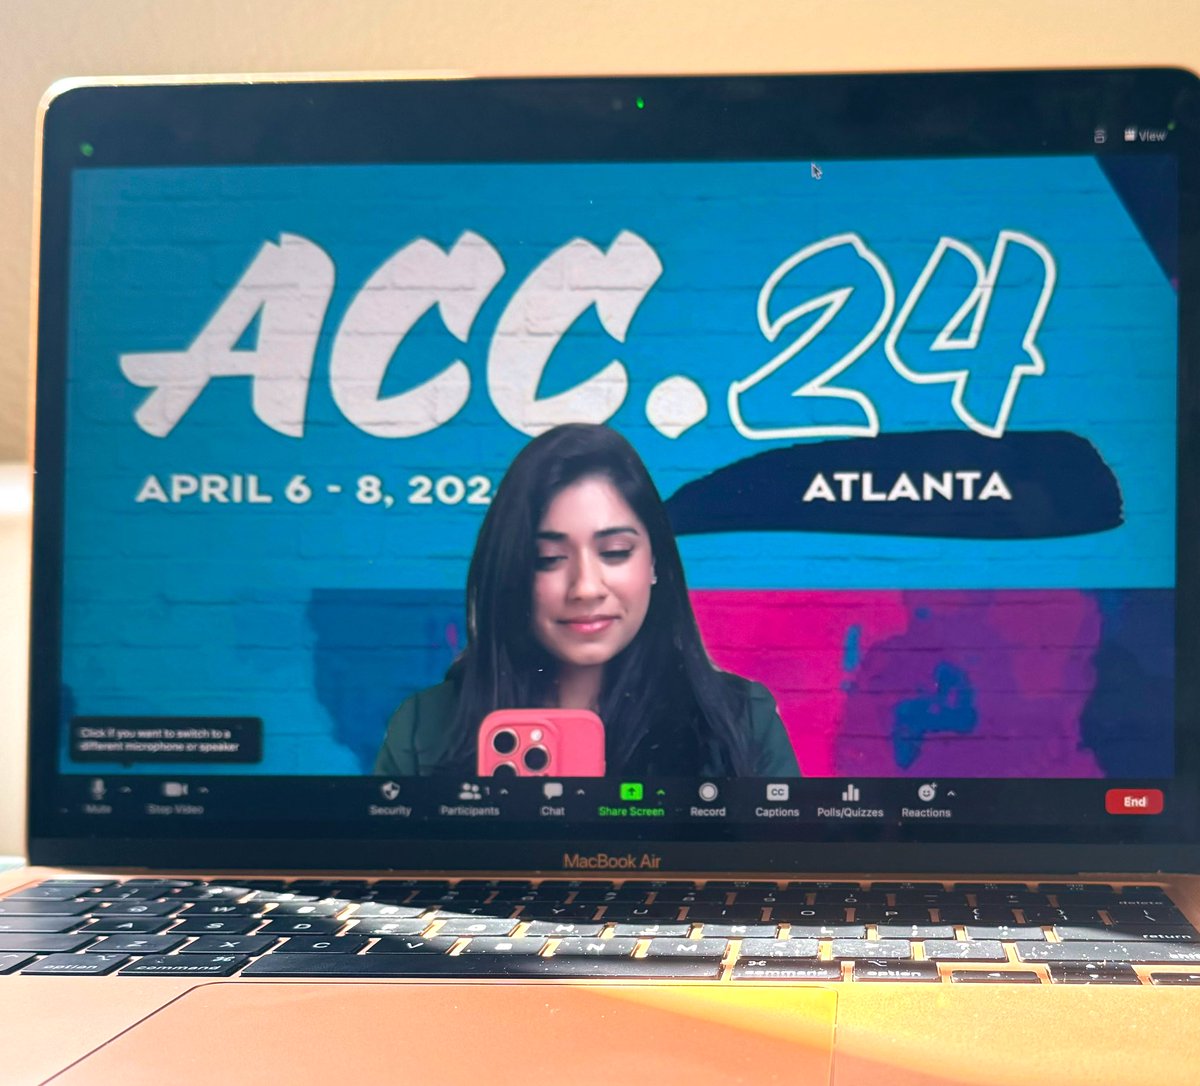 Virtual set up for @ACCinTouch WIC session! Missing seeing everyone in person this year! Hope everyone is having a great time learning!! Come join us in the WIC lounge at 1:30pm EST!
#ACC2024 #ACCWIC #ACCACPC #PedsCards #PedCard #CHD @DrJenniferCo_Vu @gina_lundberg @DrToniyaSingh